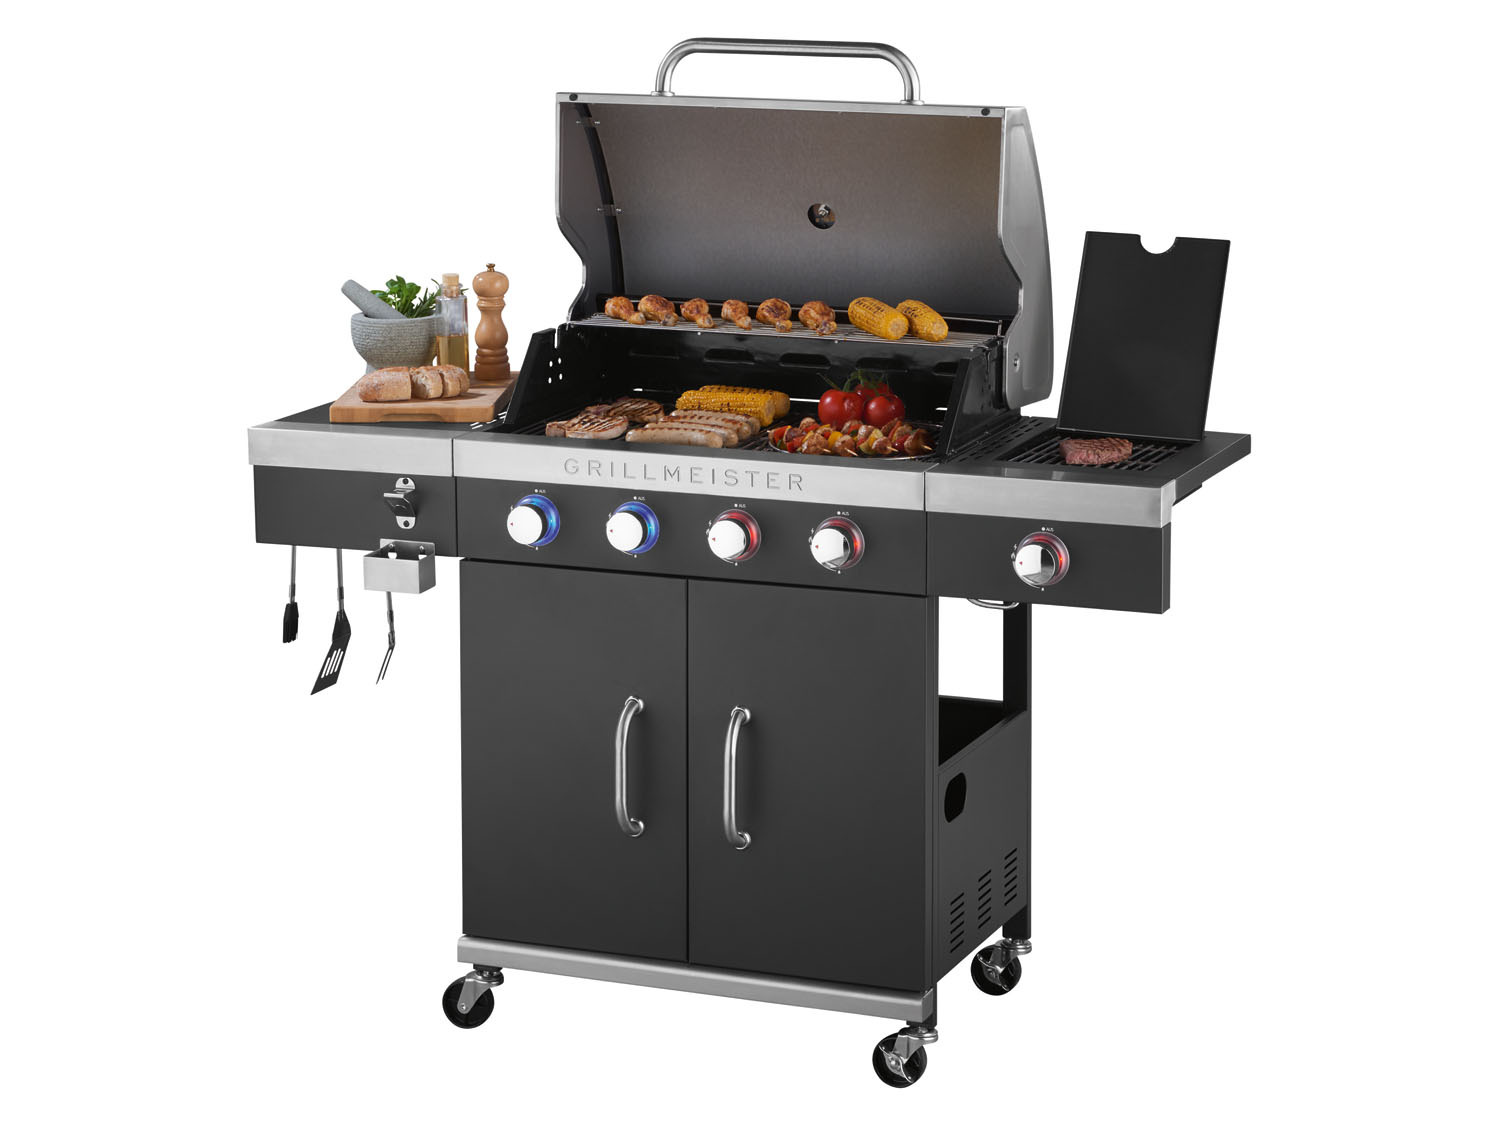 GRILLMEISTER Gasgrill, 4plus1 Brenner, 19,7 LIDL kW 